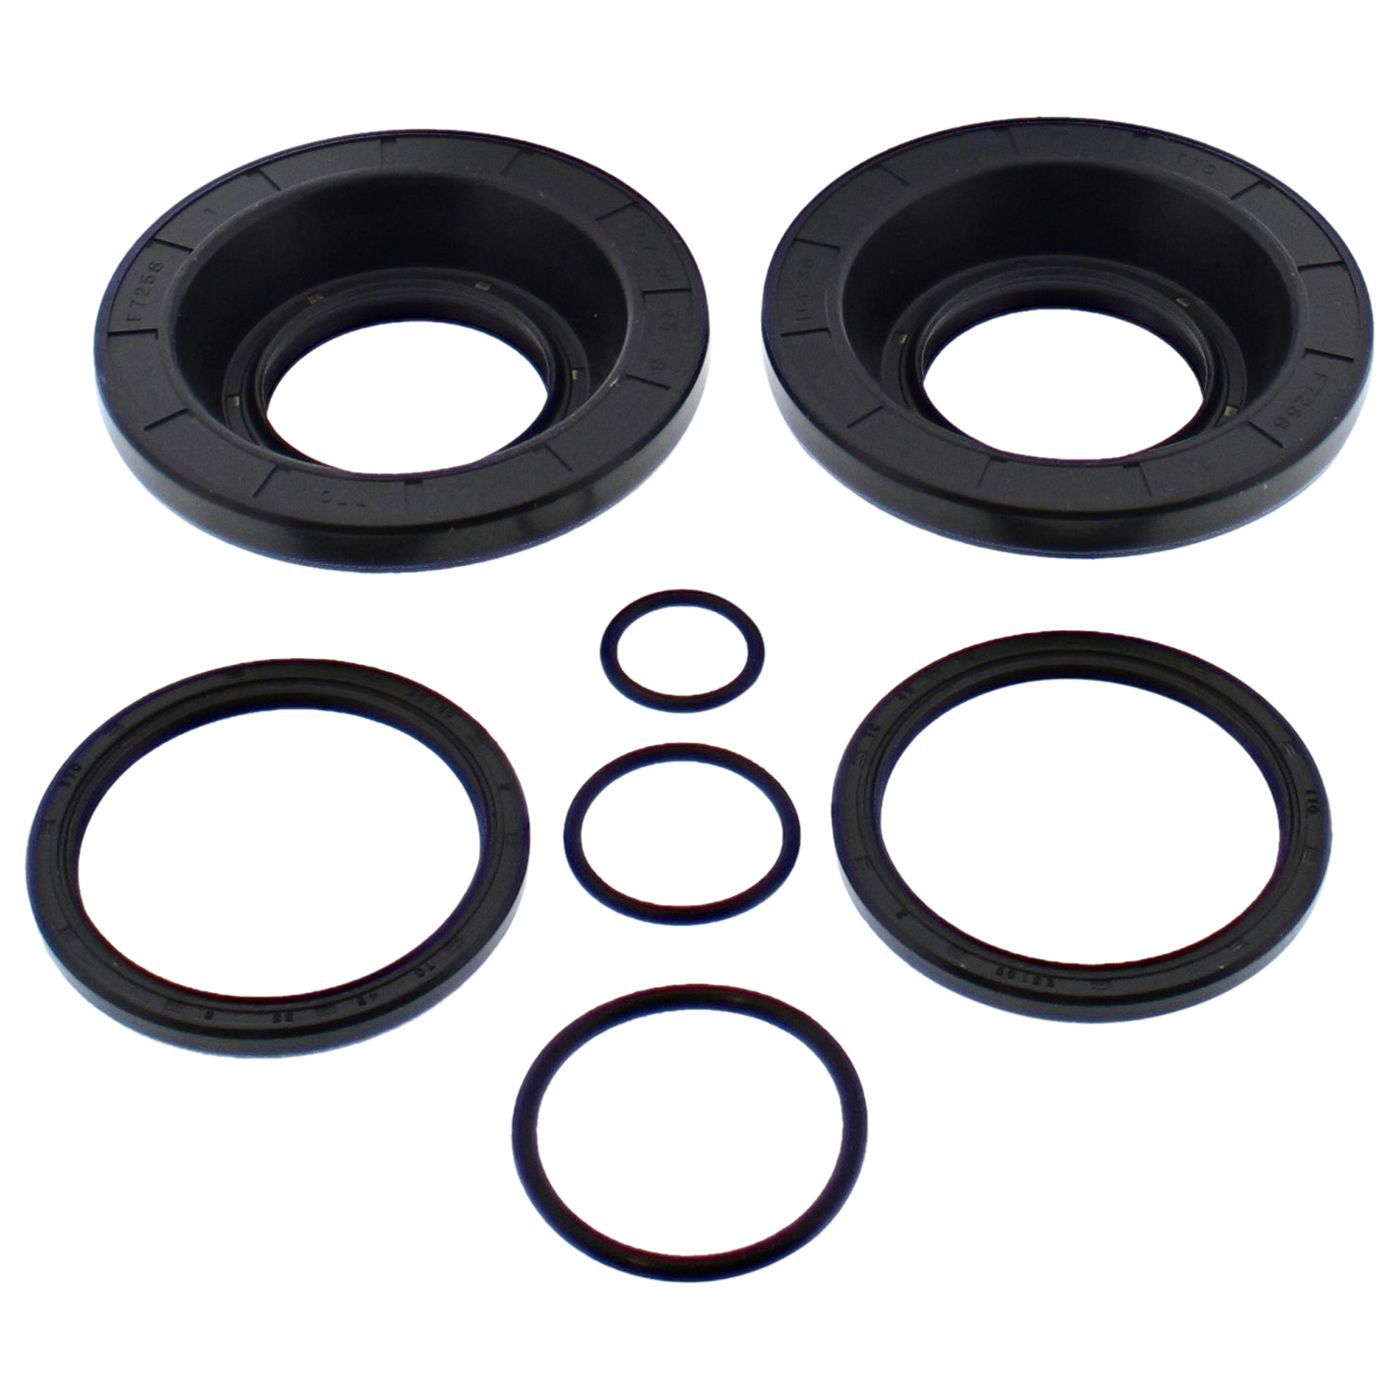 Wrp Diff Seal Kits - WRP252138-5 image